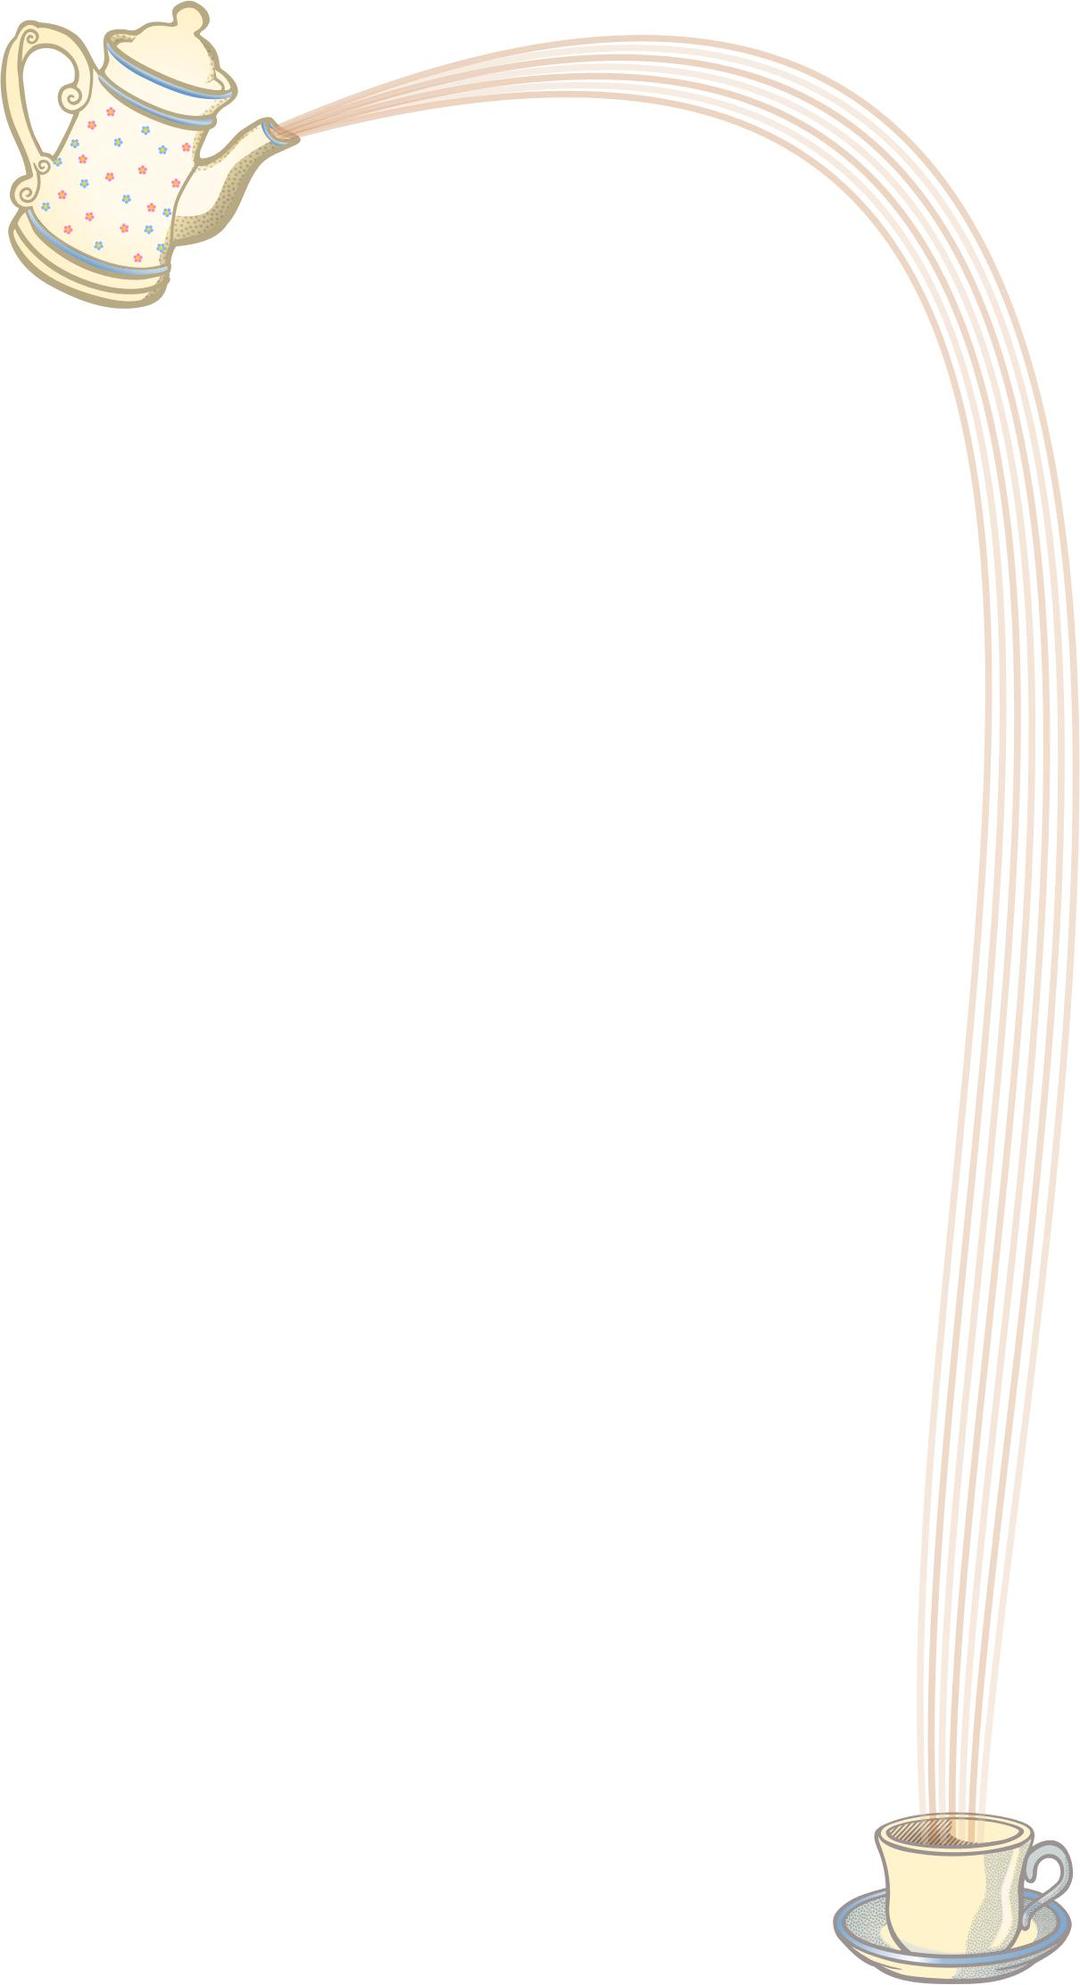 Pouring Coffee Border png transparent